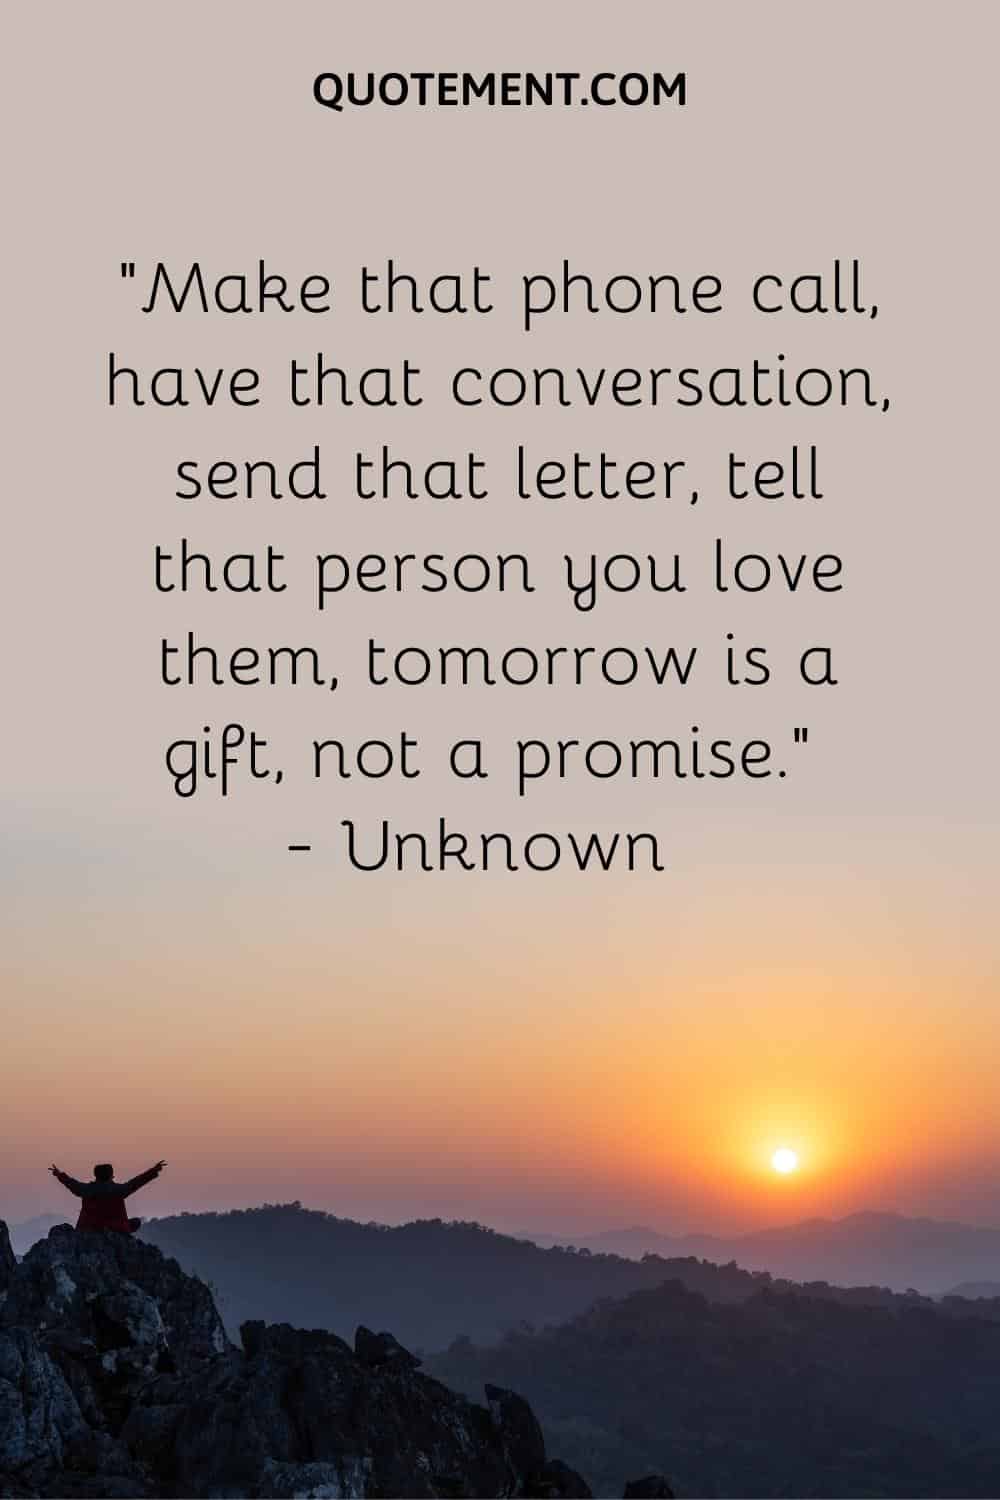 Make that phone call, have that conversation, send that letter, tell that person you love them, tomorrow is a gift, not a promise